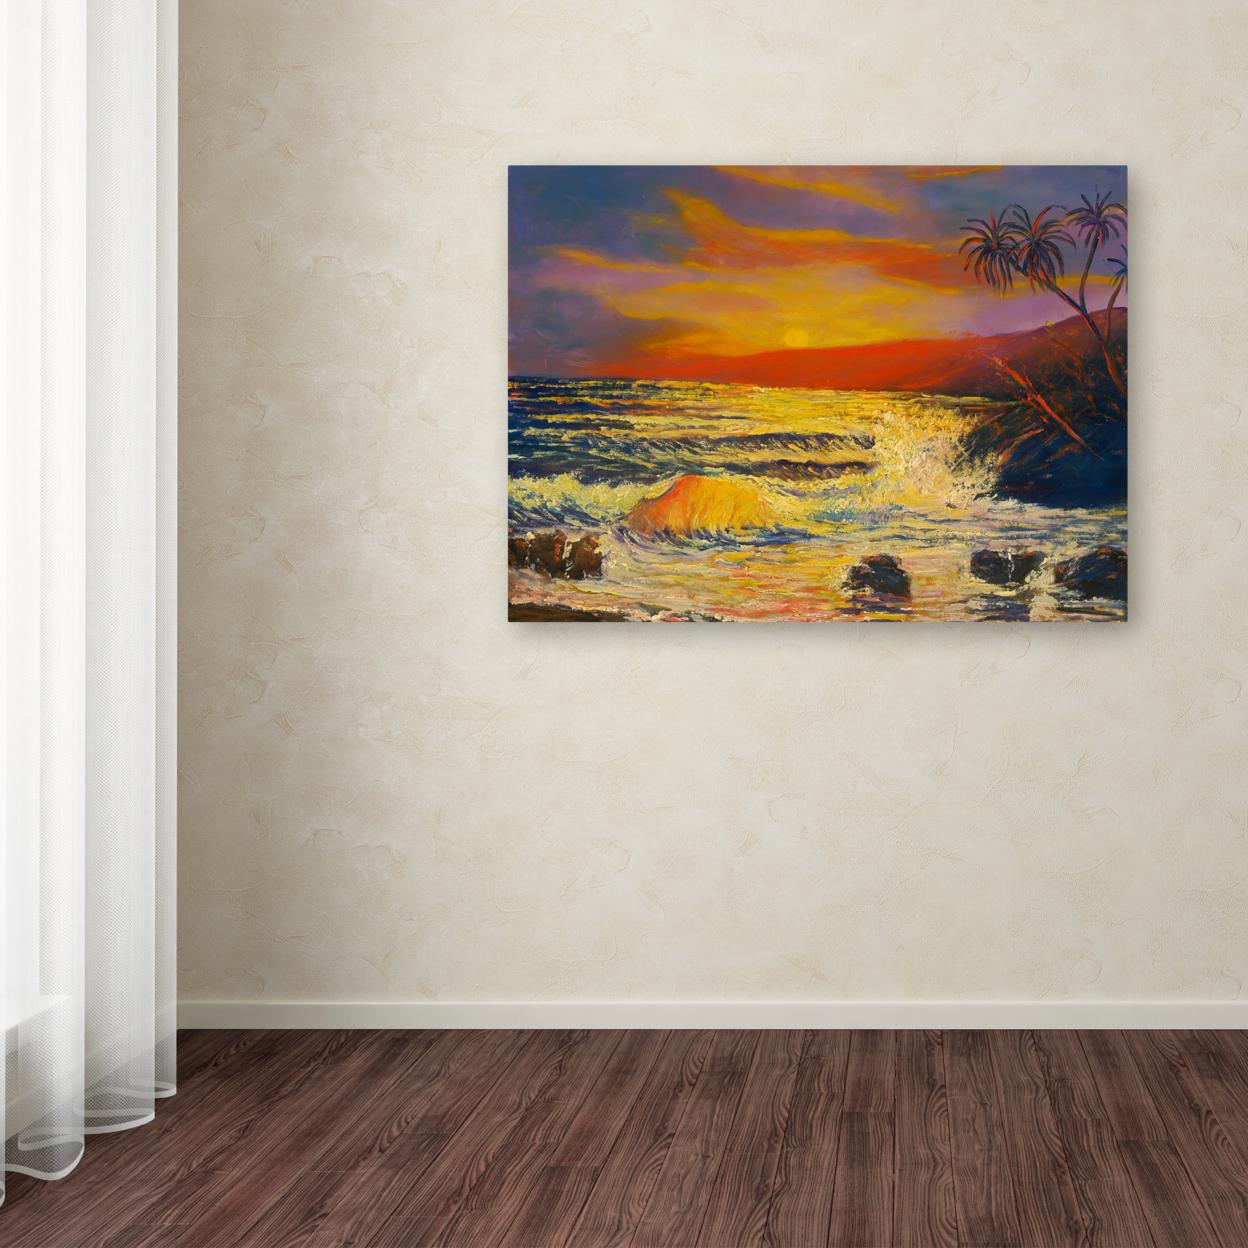 Manor Shadian 'Maui Sunset' Canvas Wall Art 35 X 47 Inches